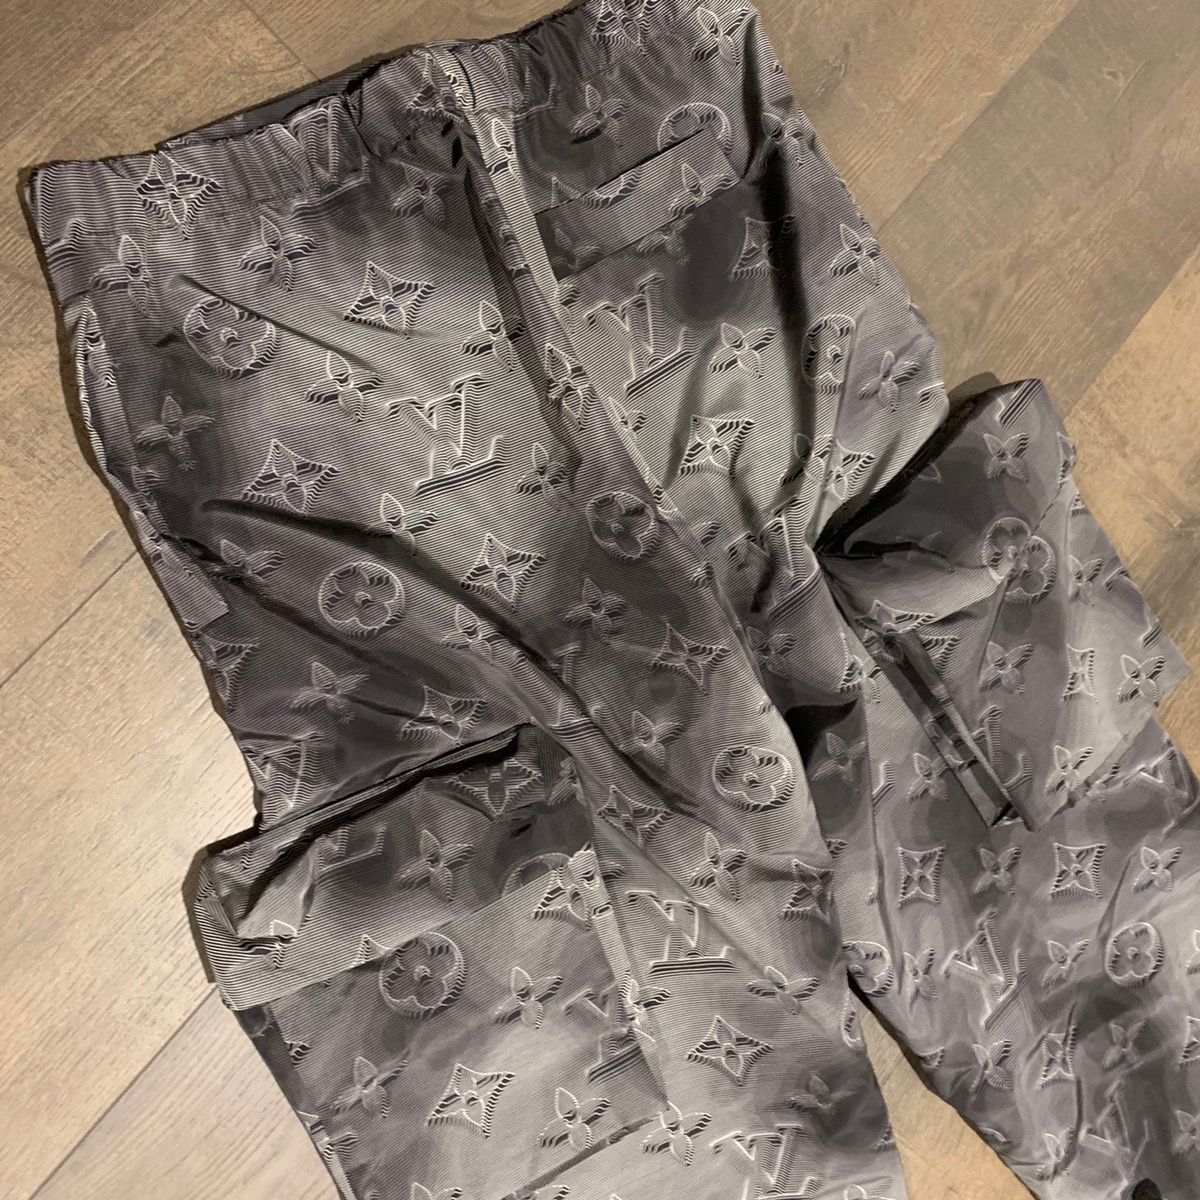 Monogram Removable 3D Pockets Cargo Pant w/ Tags